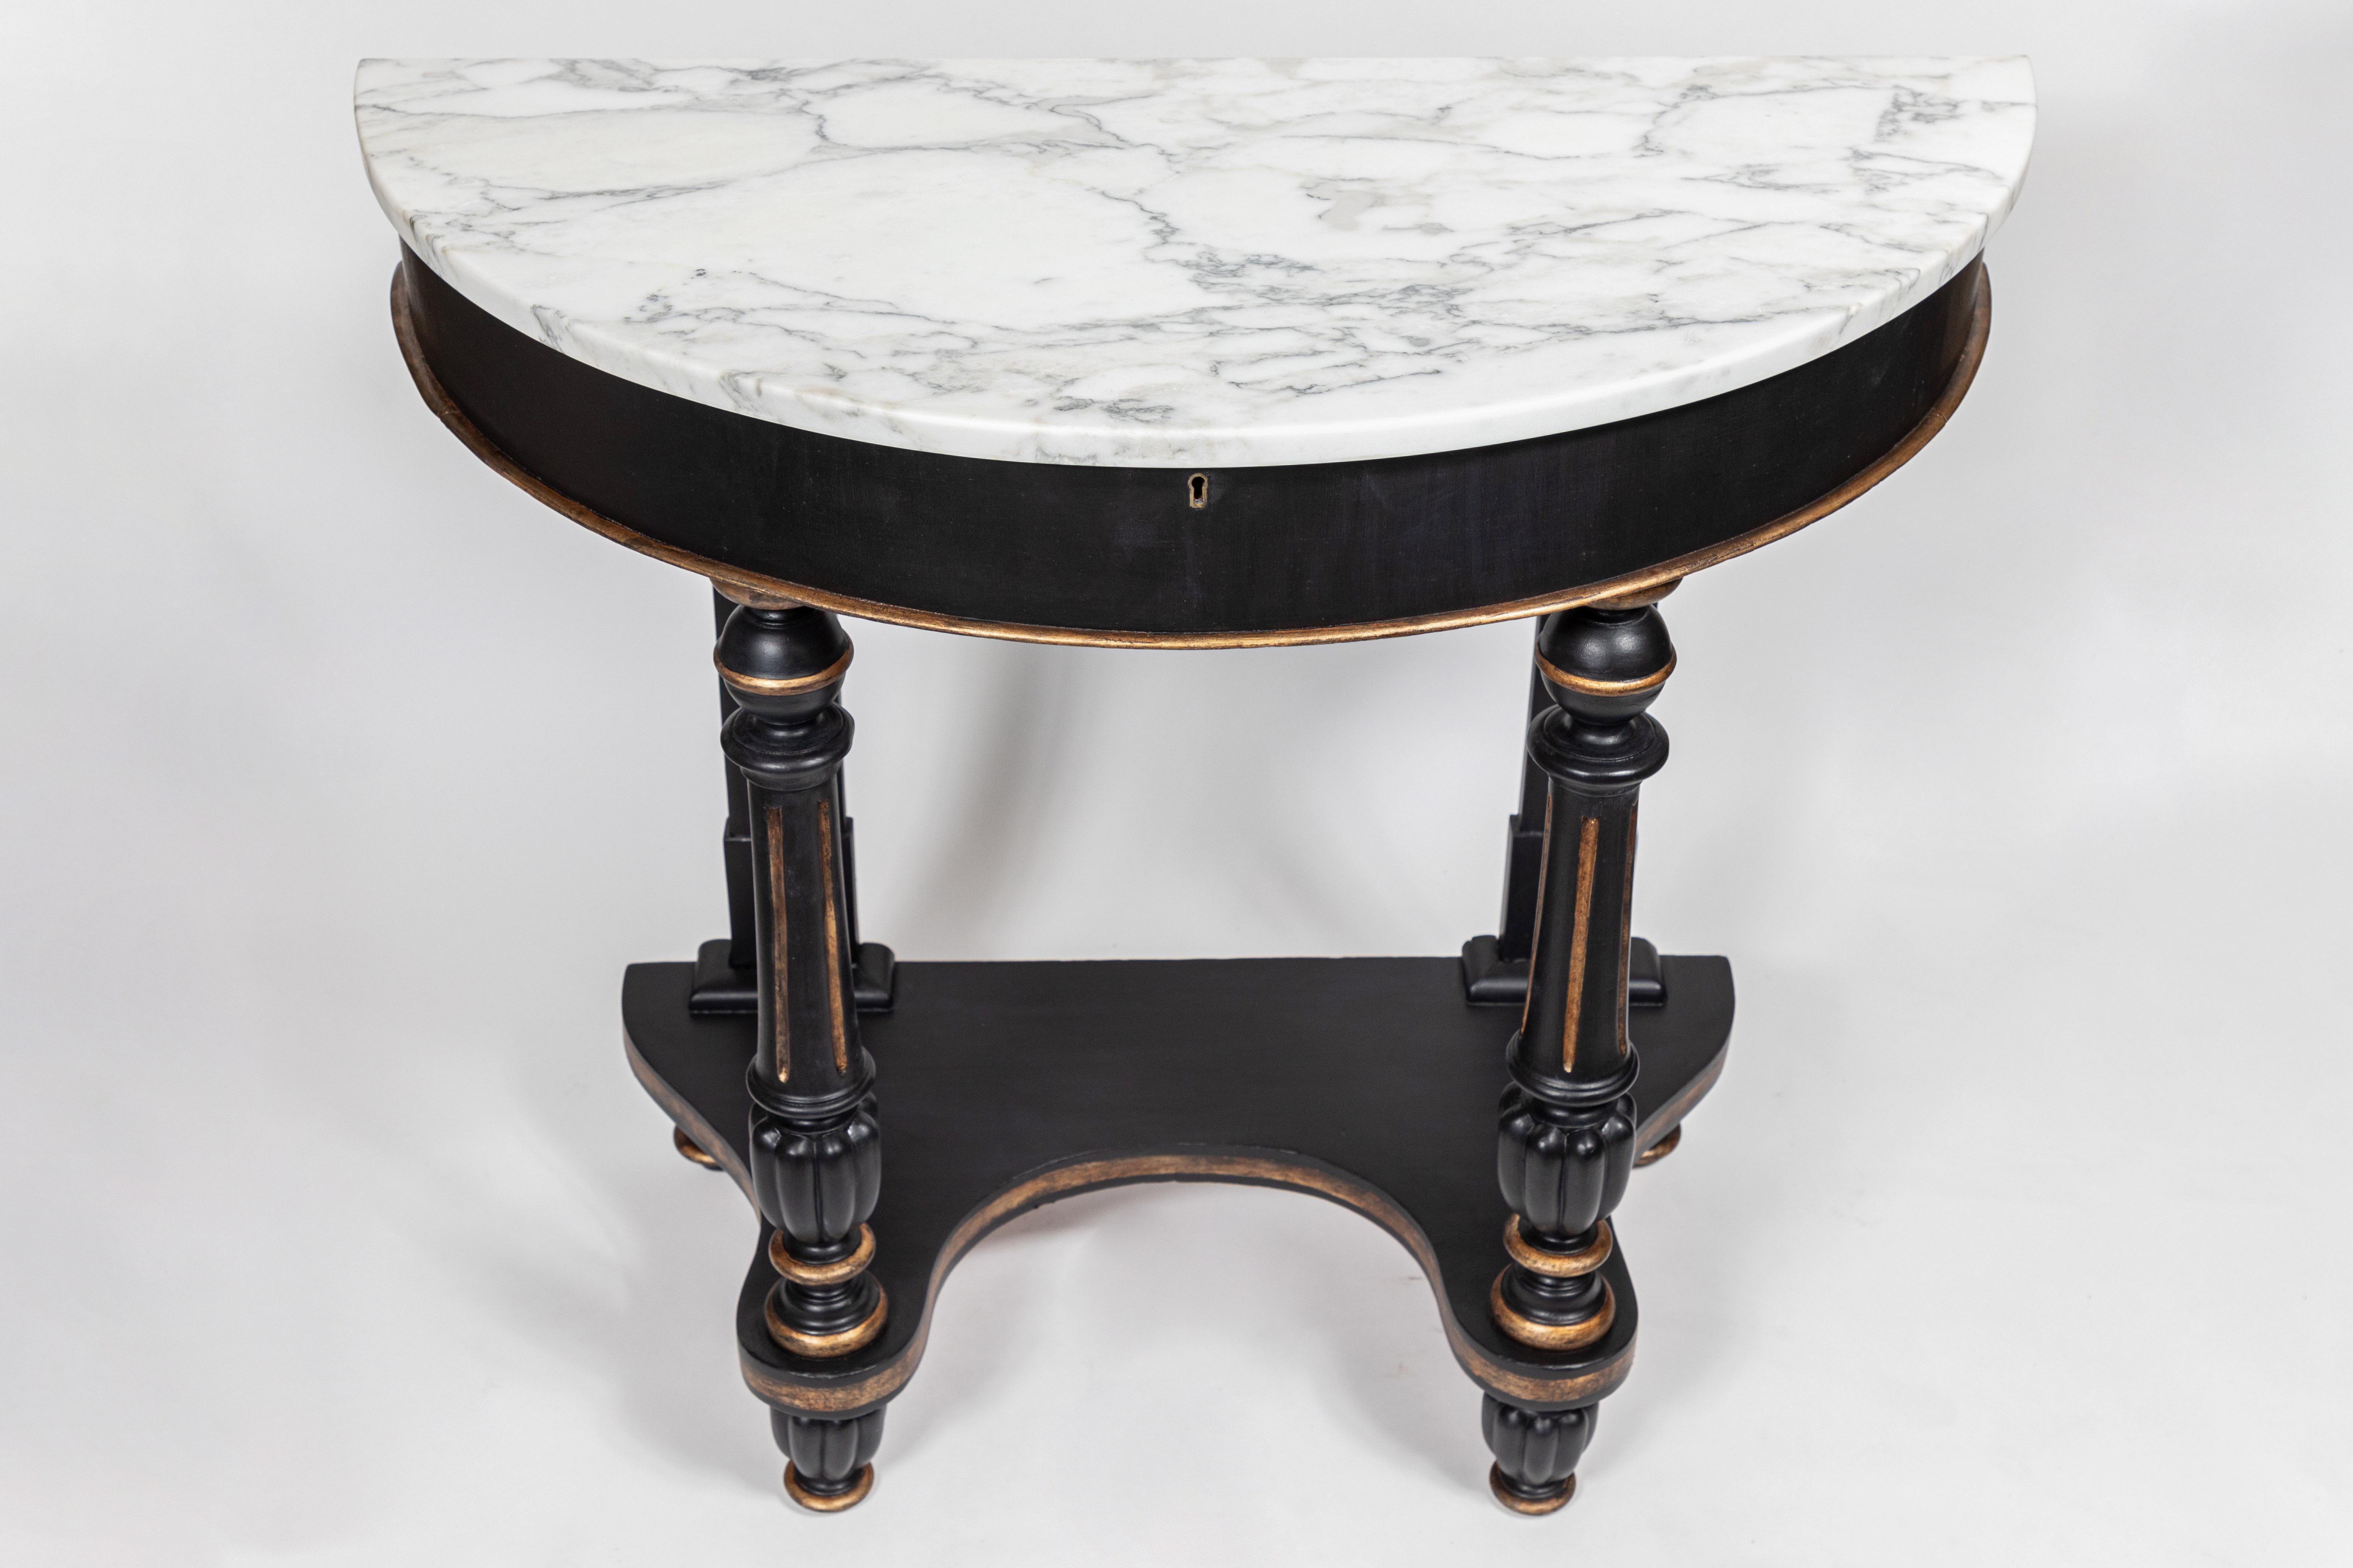 Antique Mahogany demilune table with William and Mary style turned legs.

Featuring a new matte black hand painted finish with antique gold accents with a new Carrara marble top.